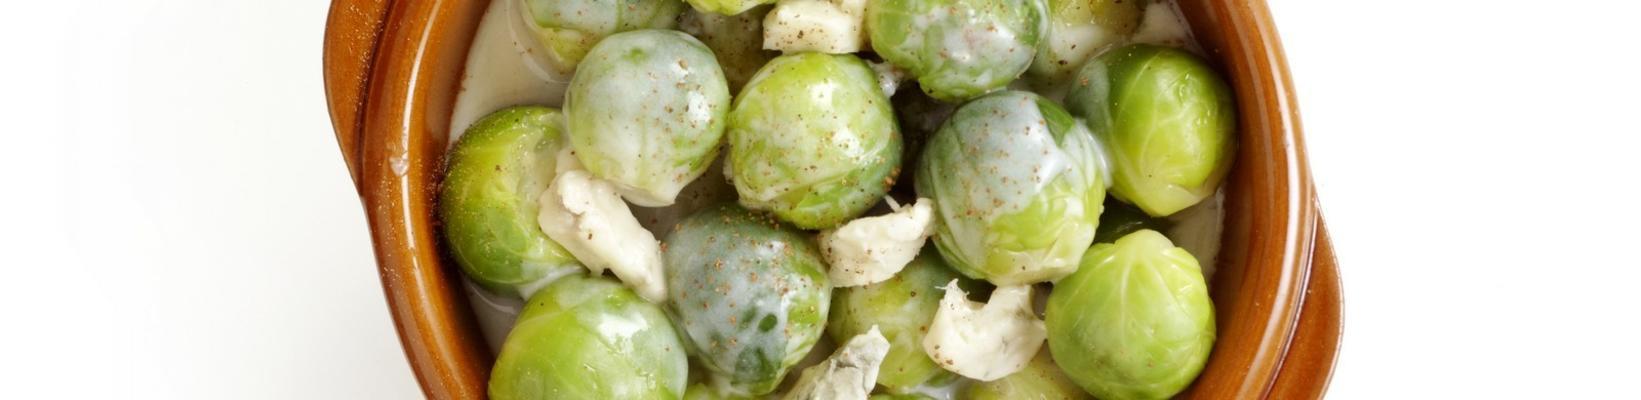 Brussels sprouts with gorgonzola sauce